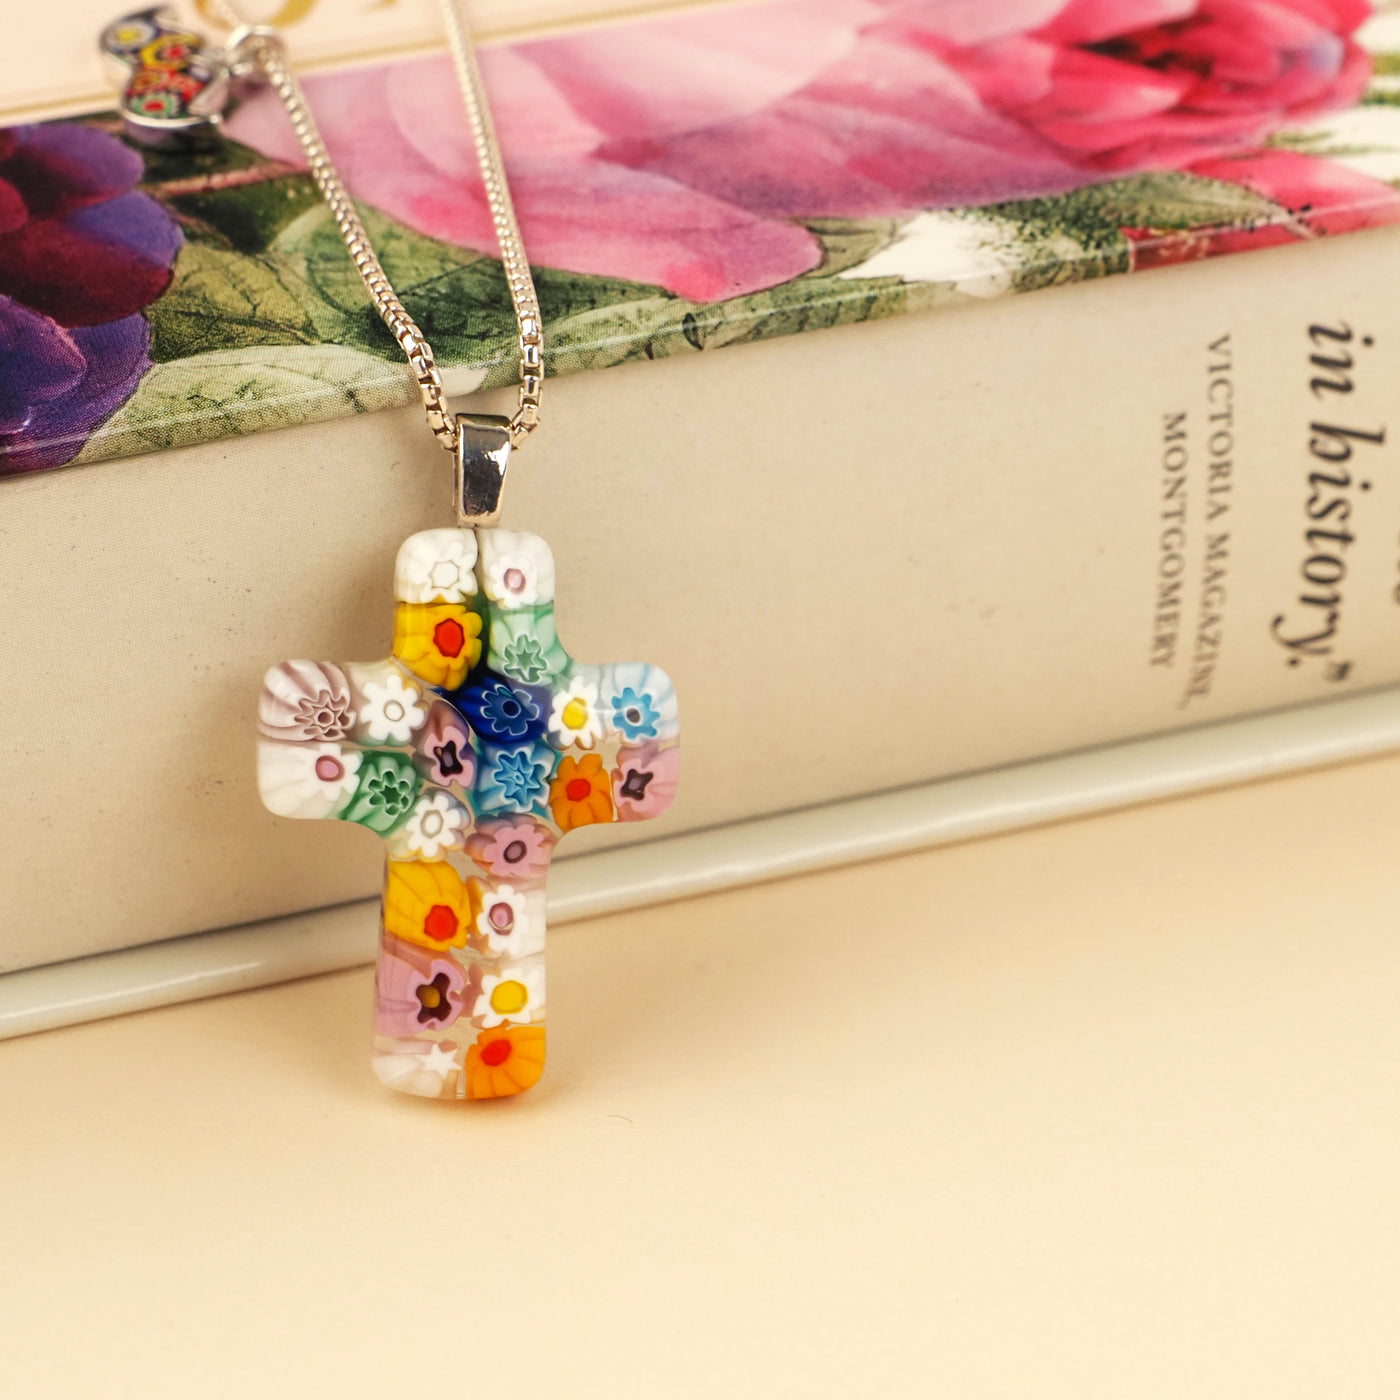 Floral Cross in Bloom Necklace